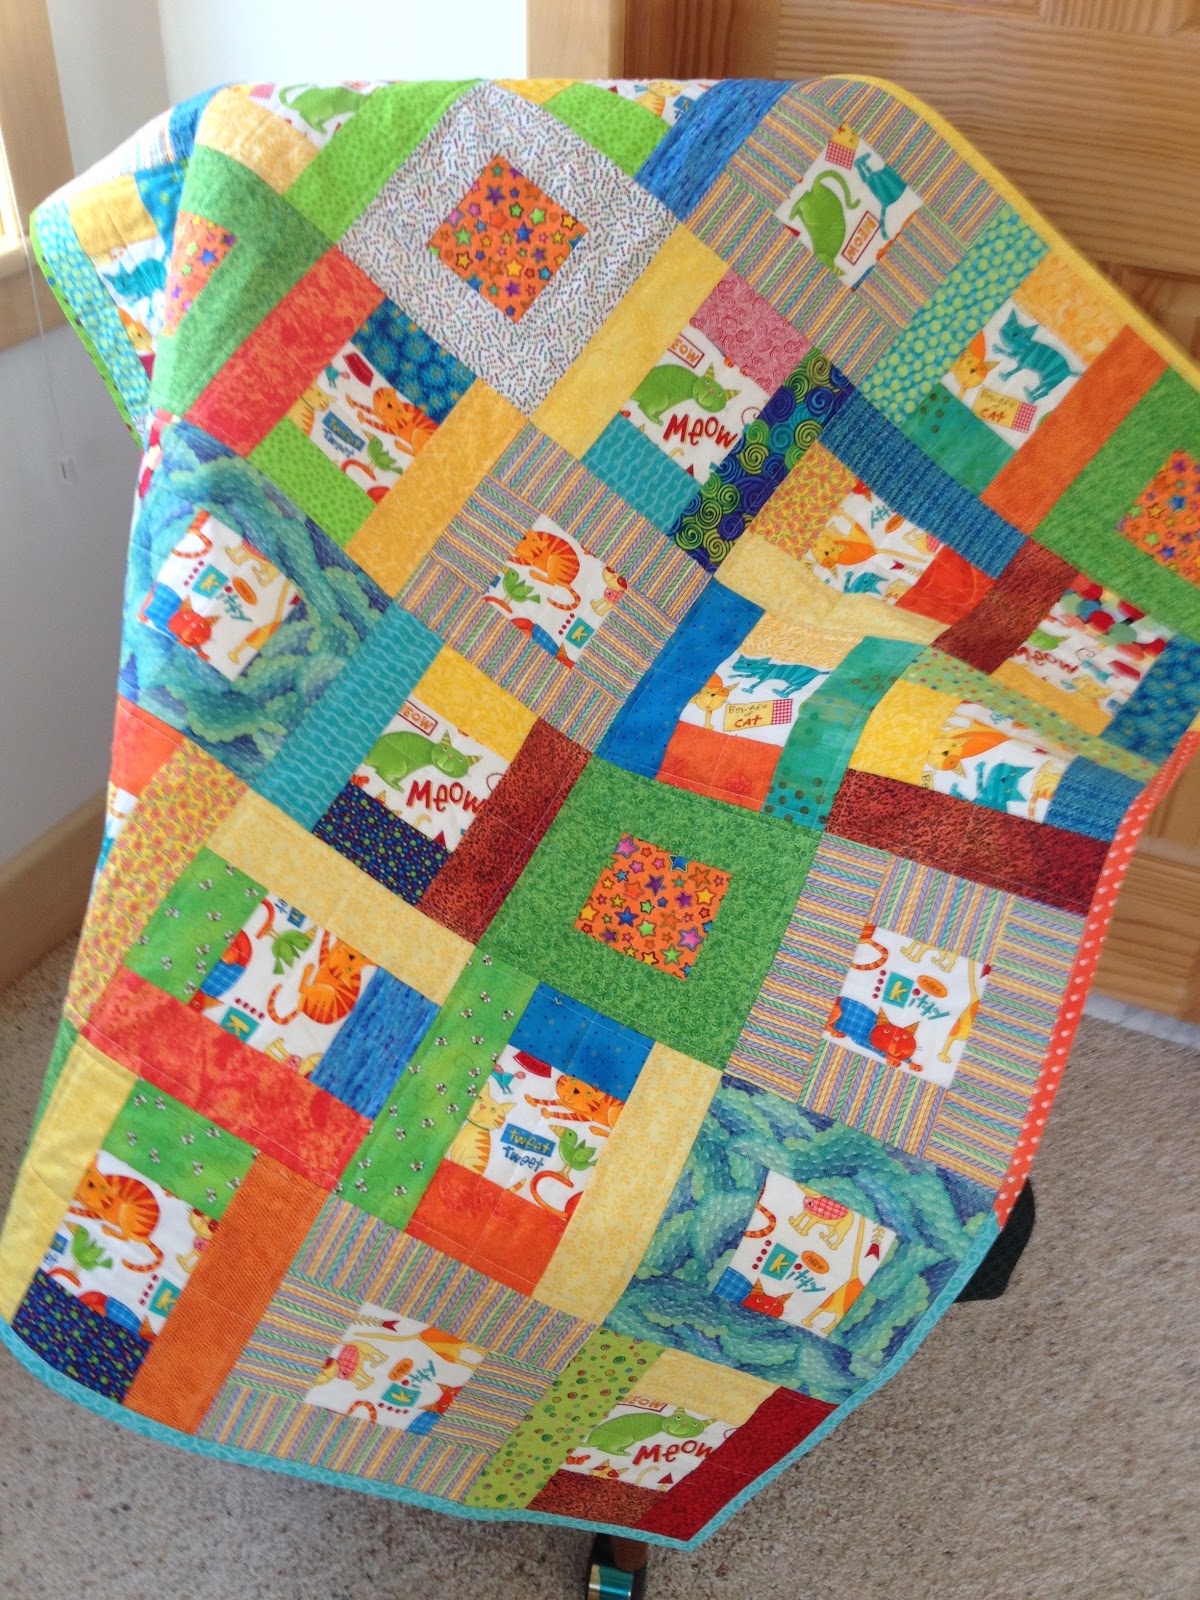 asimplelife Quilts: Finished Quilts 2012